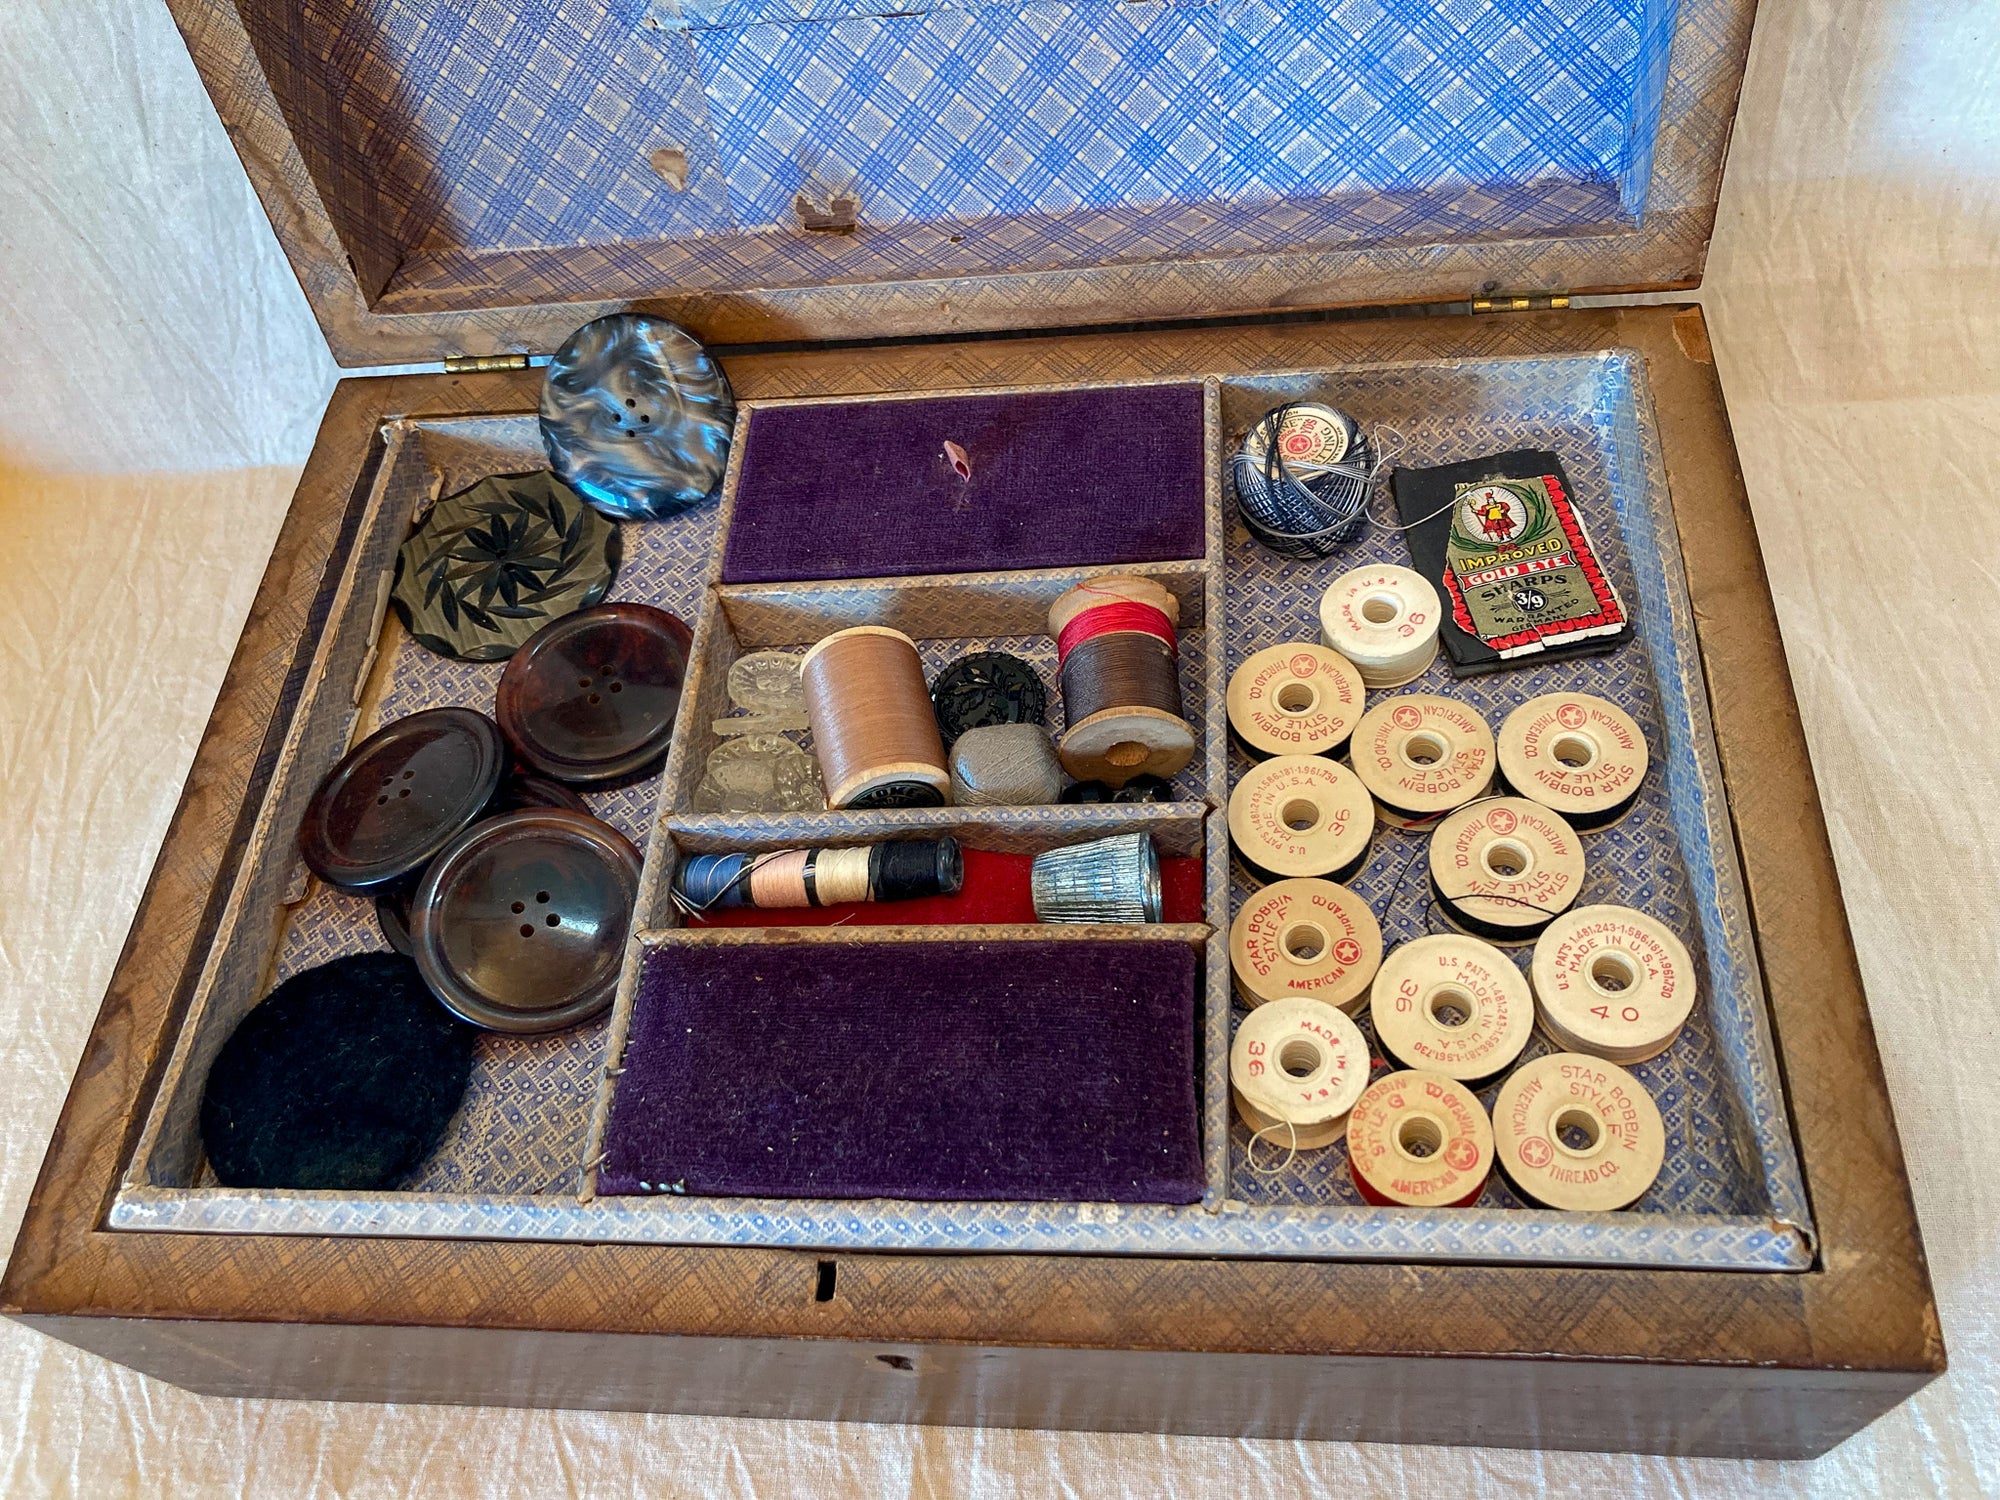 Turn of the Century Sewing Box with Contents from Several Eras